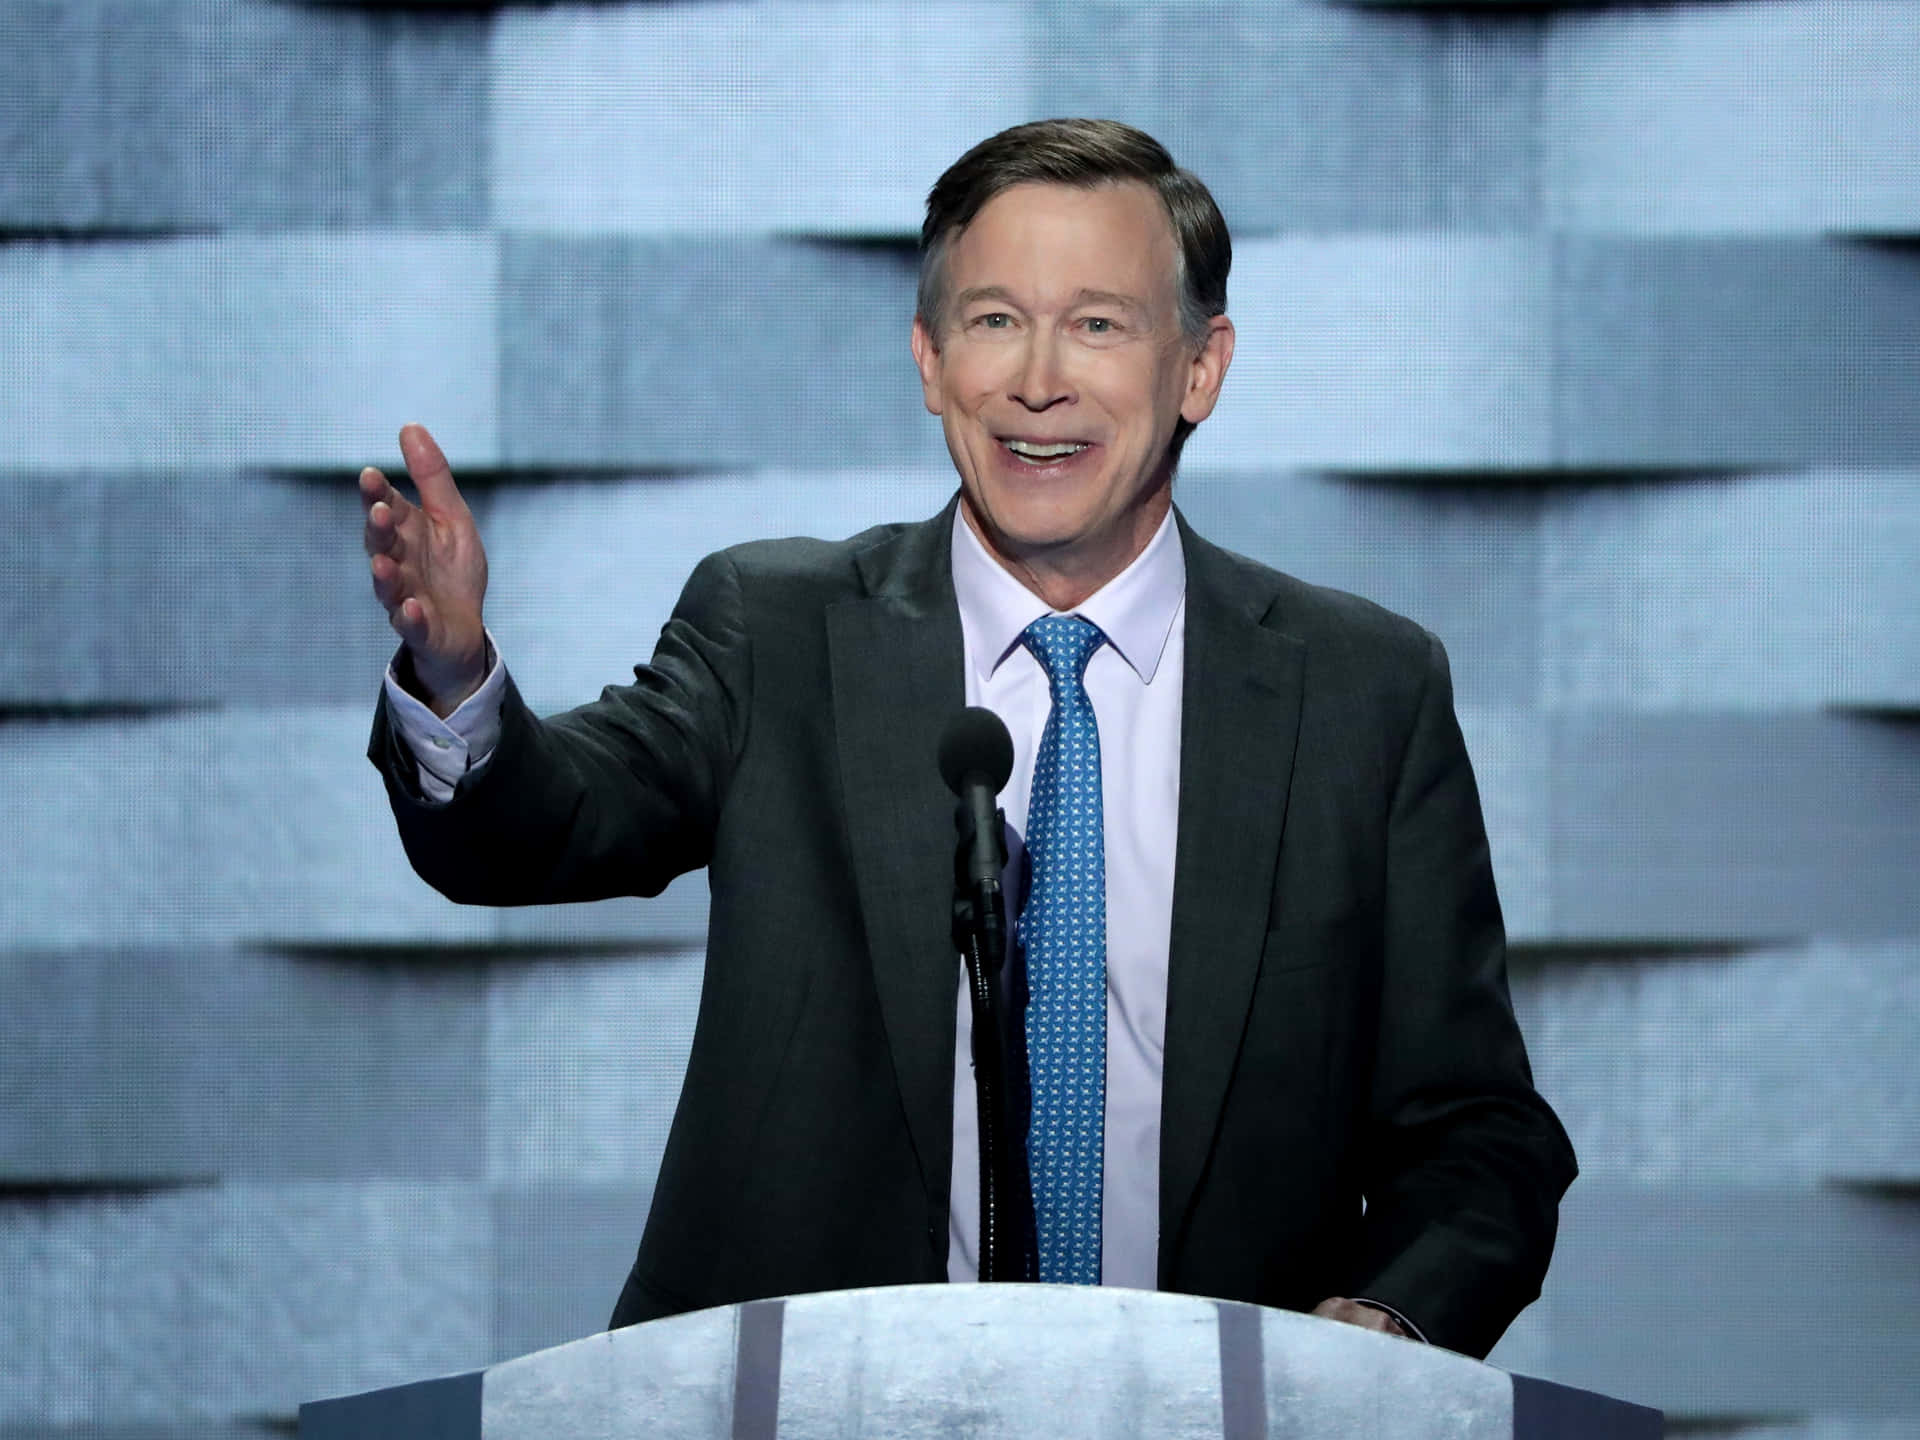 John Hickenlooper Smiling And Addressing The Crowd Wallpaper